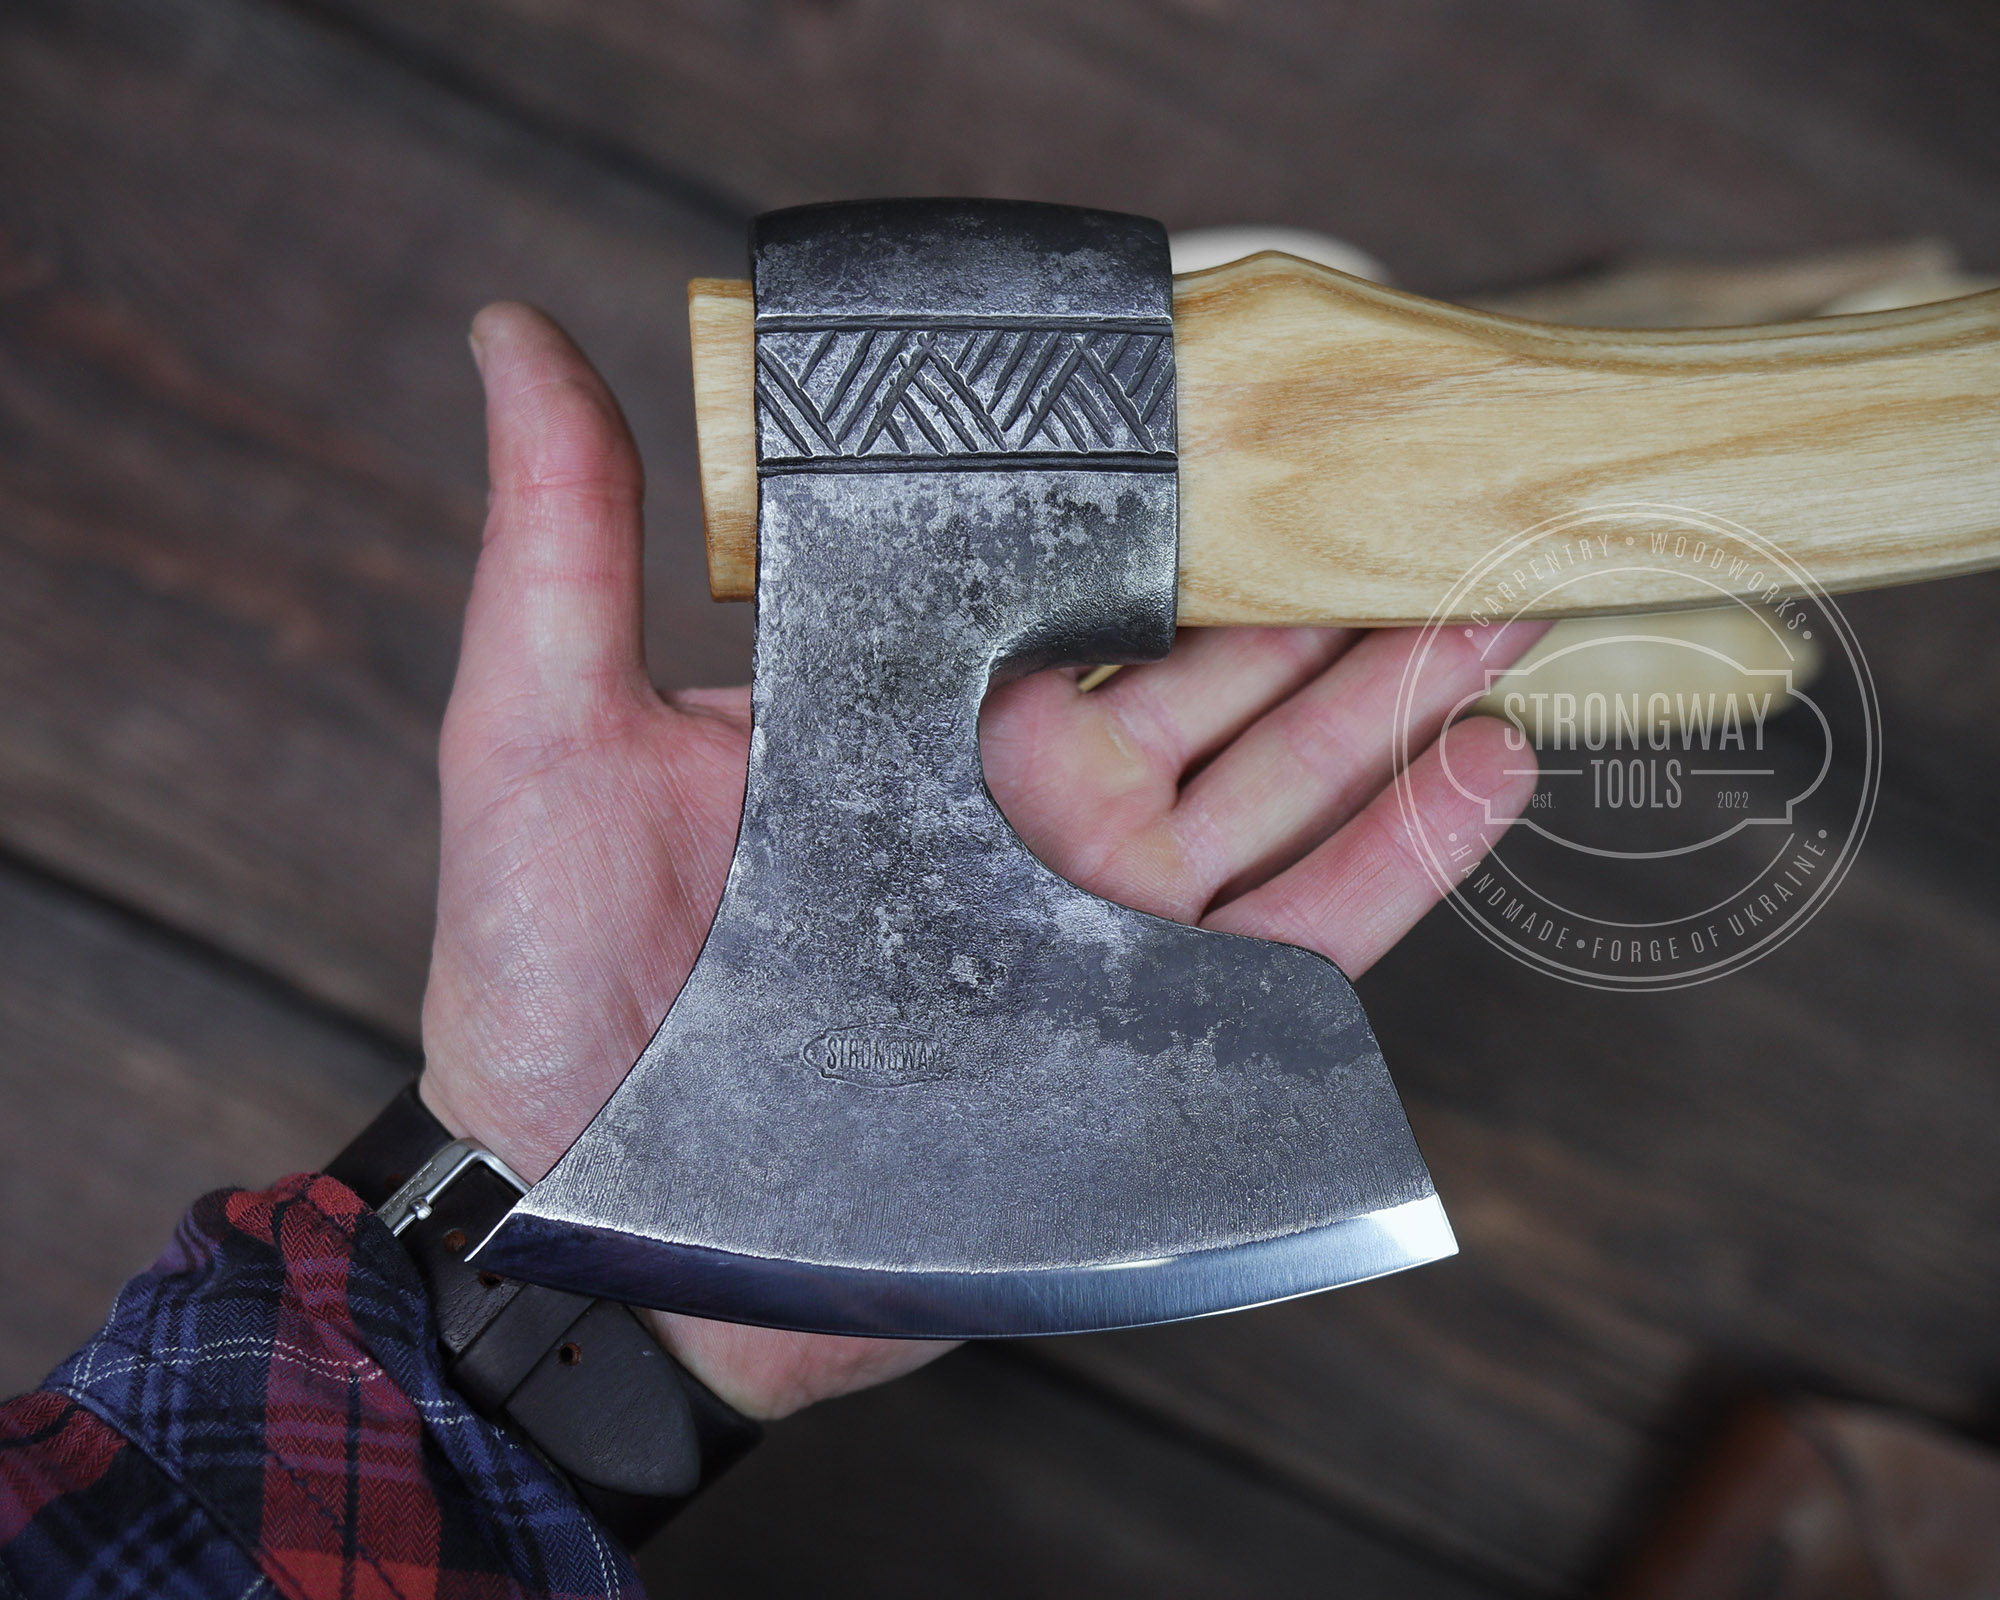 Small Finnish Carving Axe with Octogonal Handle